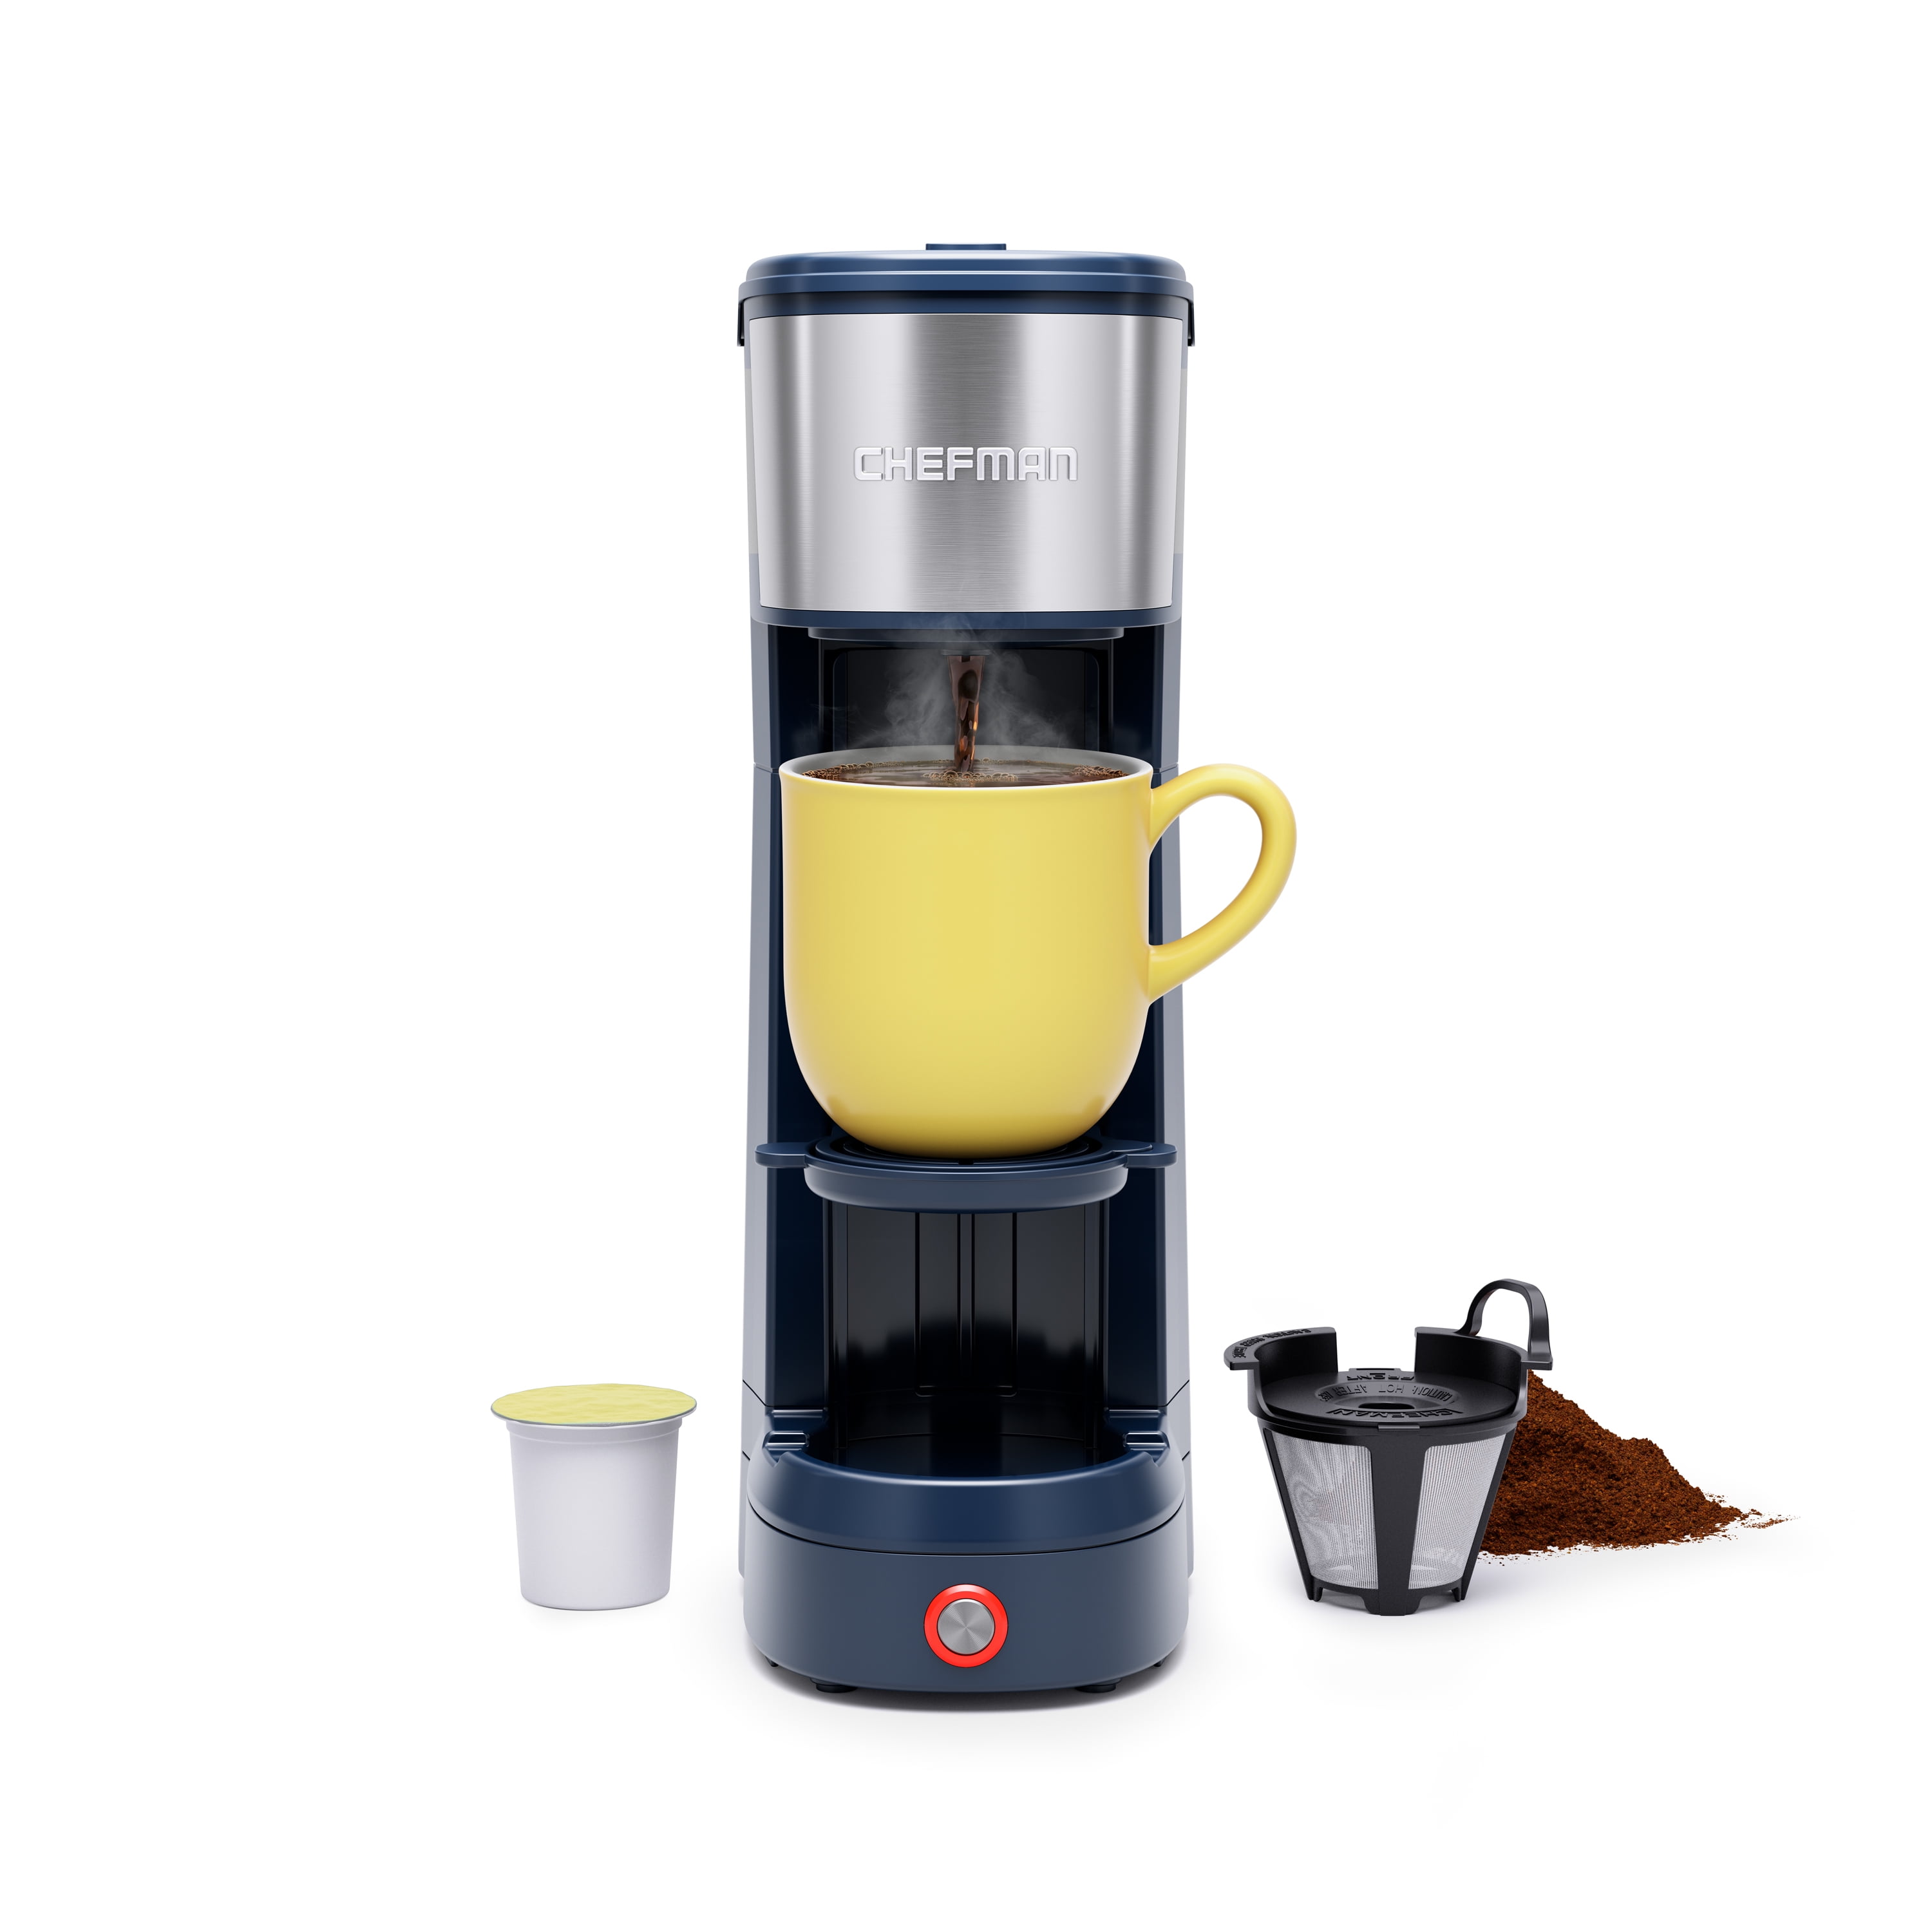 Instant Brand's single-serve coffee maker features a specially